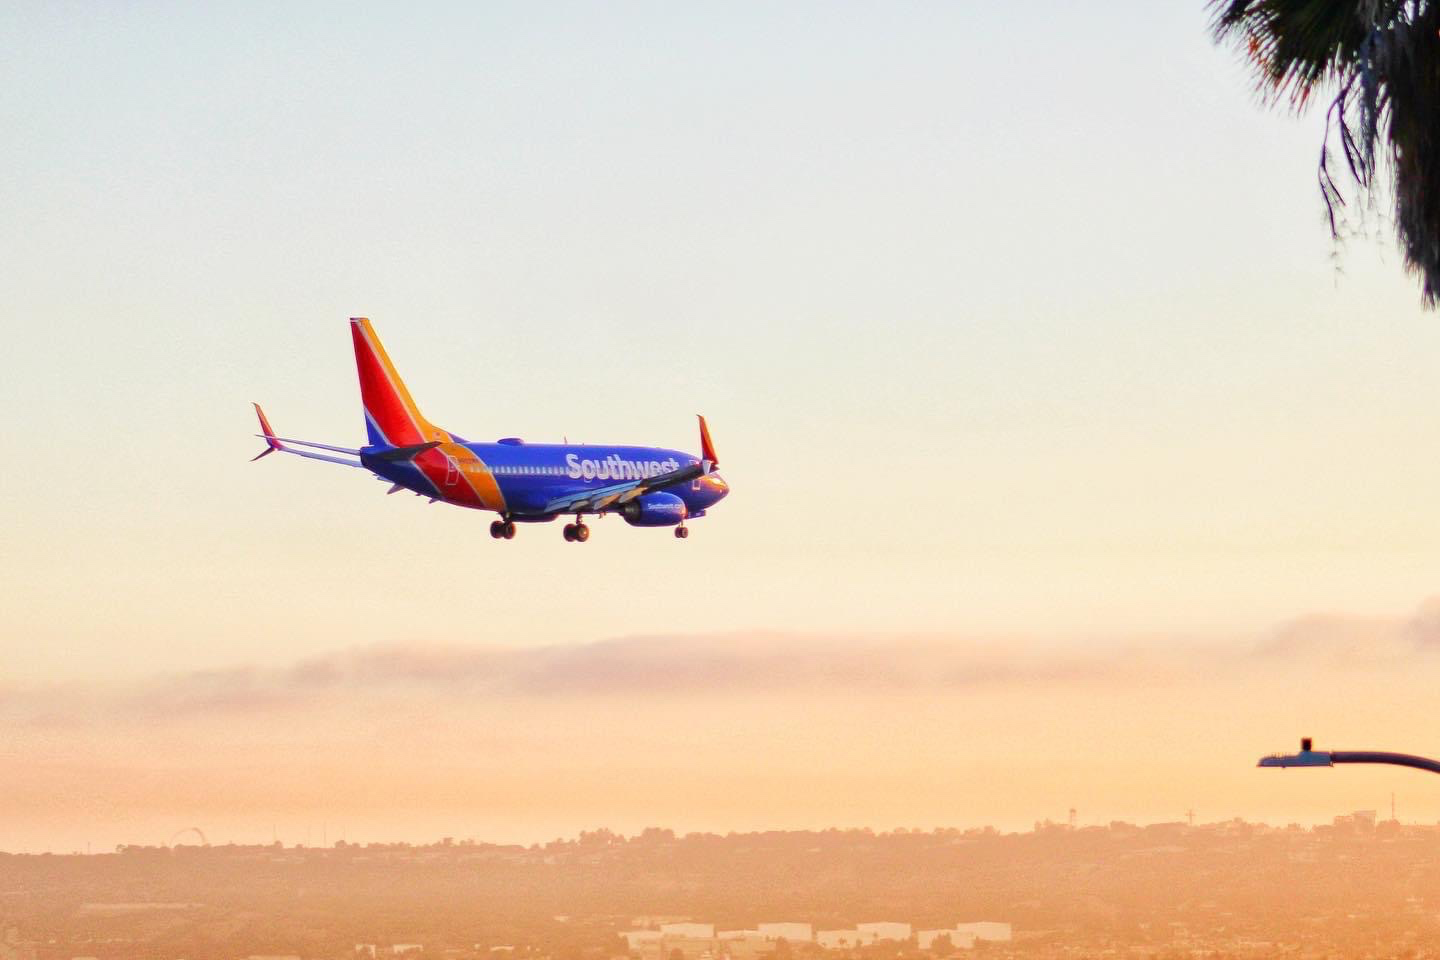 Southwest Airlines Boeing 737-700 landing.